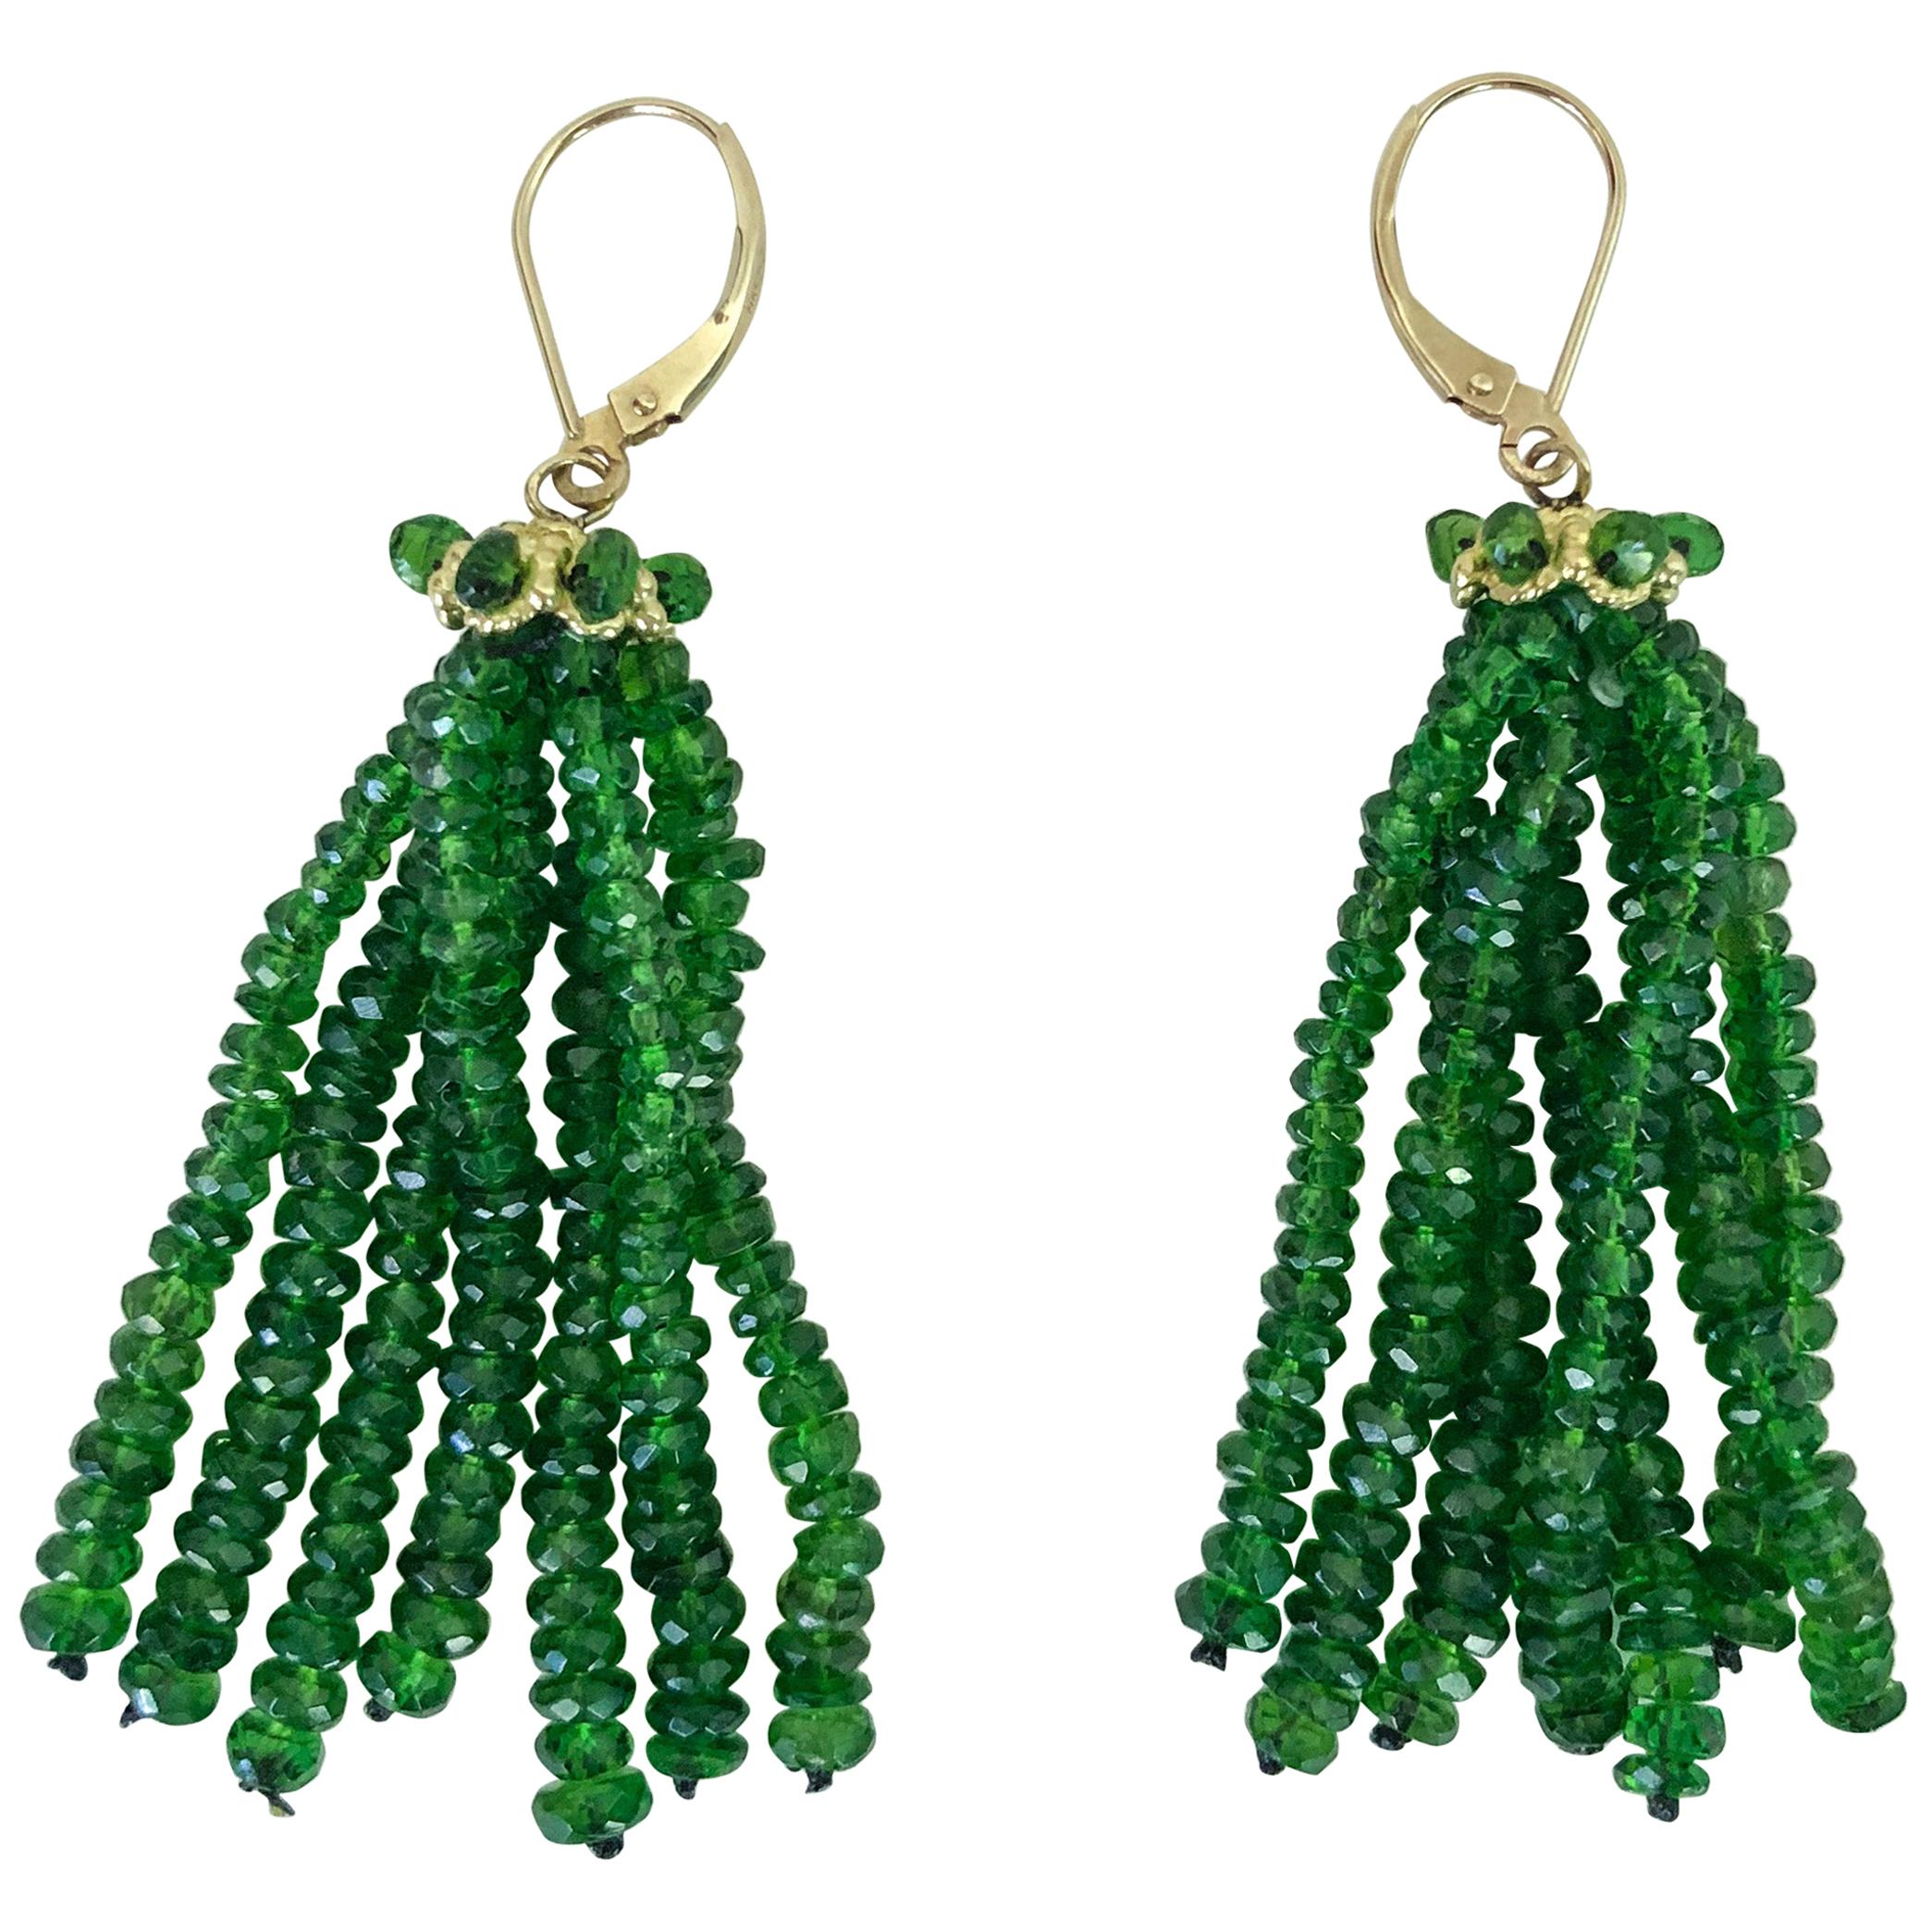 These elegant tassel earrings by Marina J. are made with stunning 4mm tsavorite beads. The earring is topped with a unique 14k gold cup that is adorned with tsavorite beads. The lever backs are made of 14k gold. These earrings are about two inches